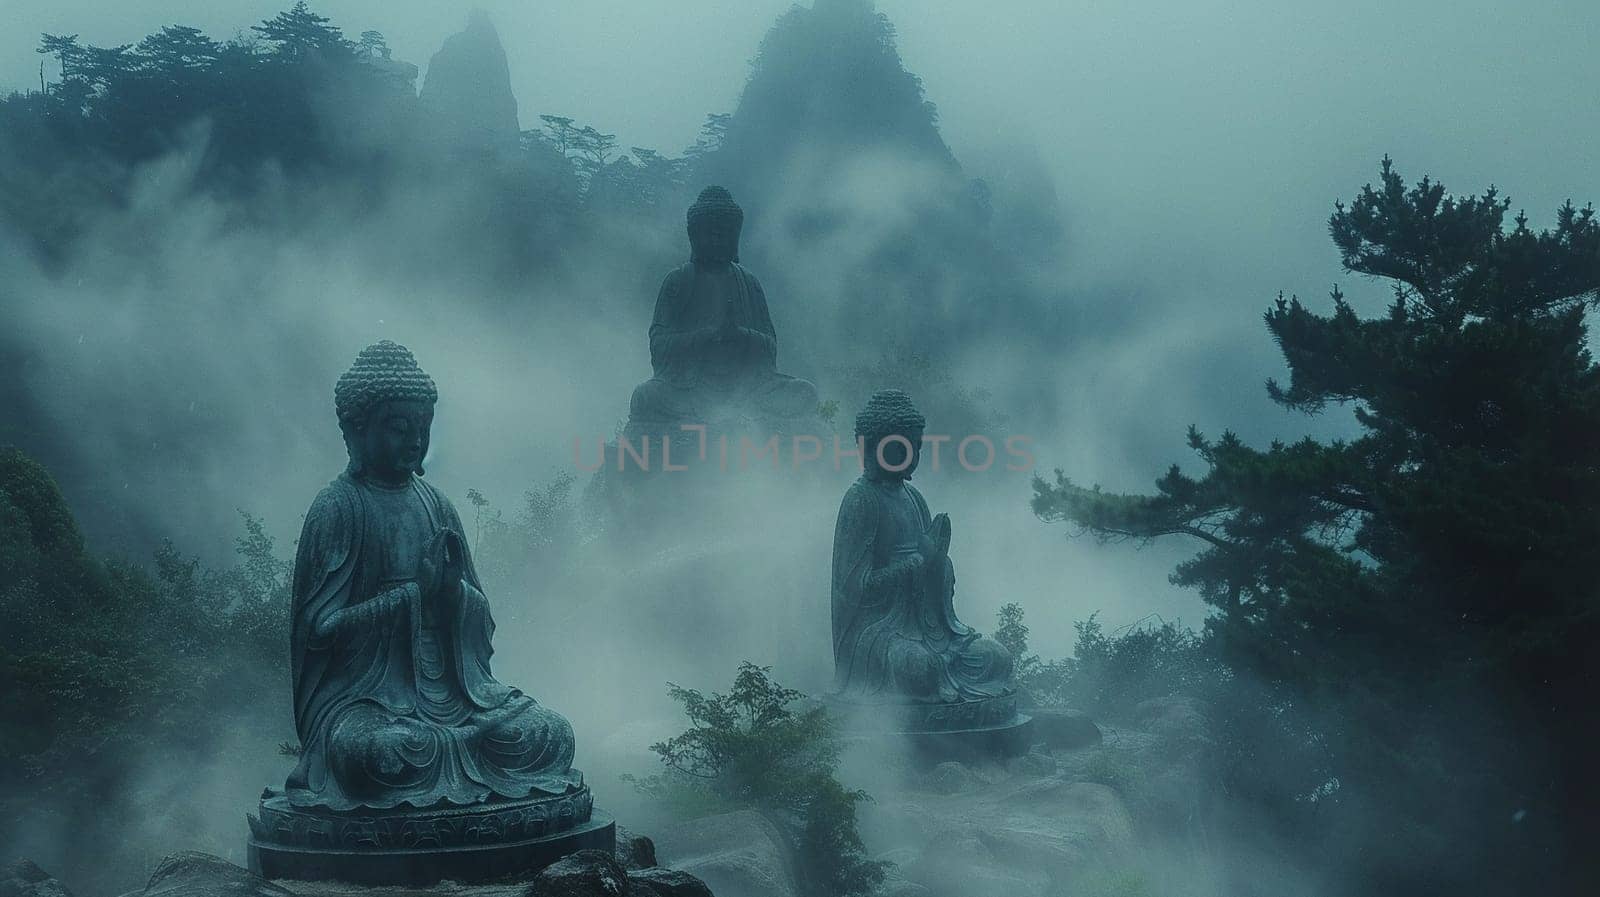 Bodhisattva Statues in Misty Mountain Temples, The figures blur into the mist, embodying compassion and the path to enlightenment.